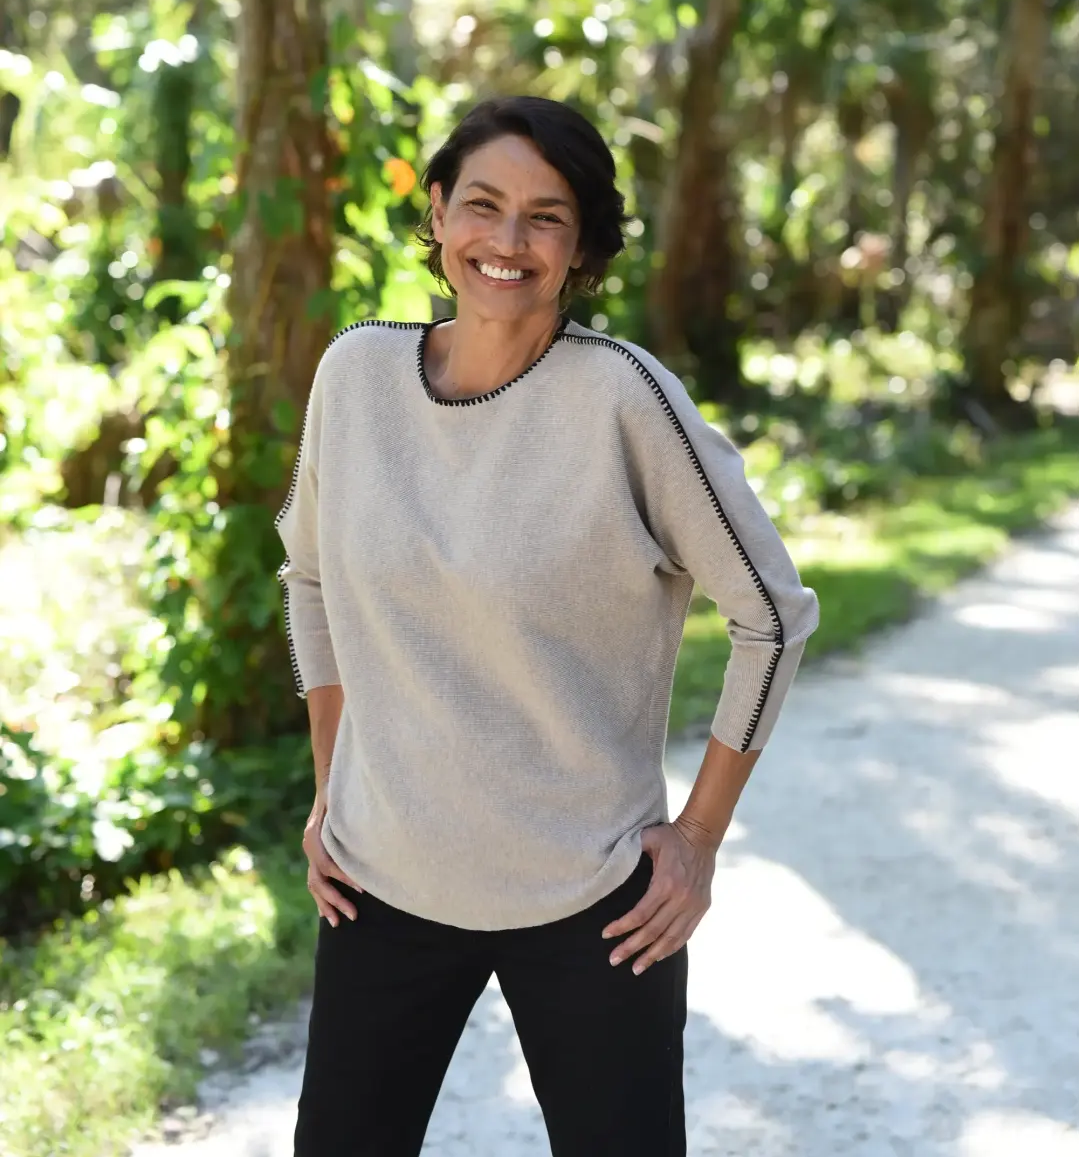 A smiling woman with short, dark hair stands on a footpath in a park. 